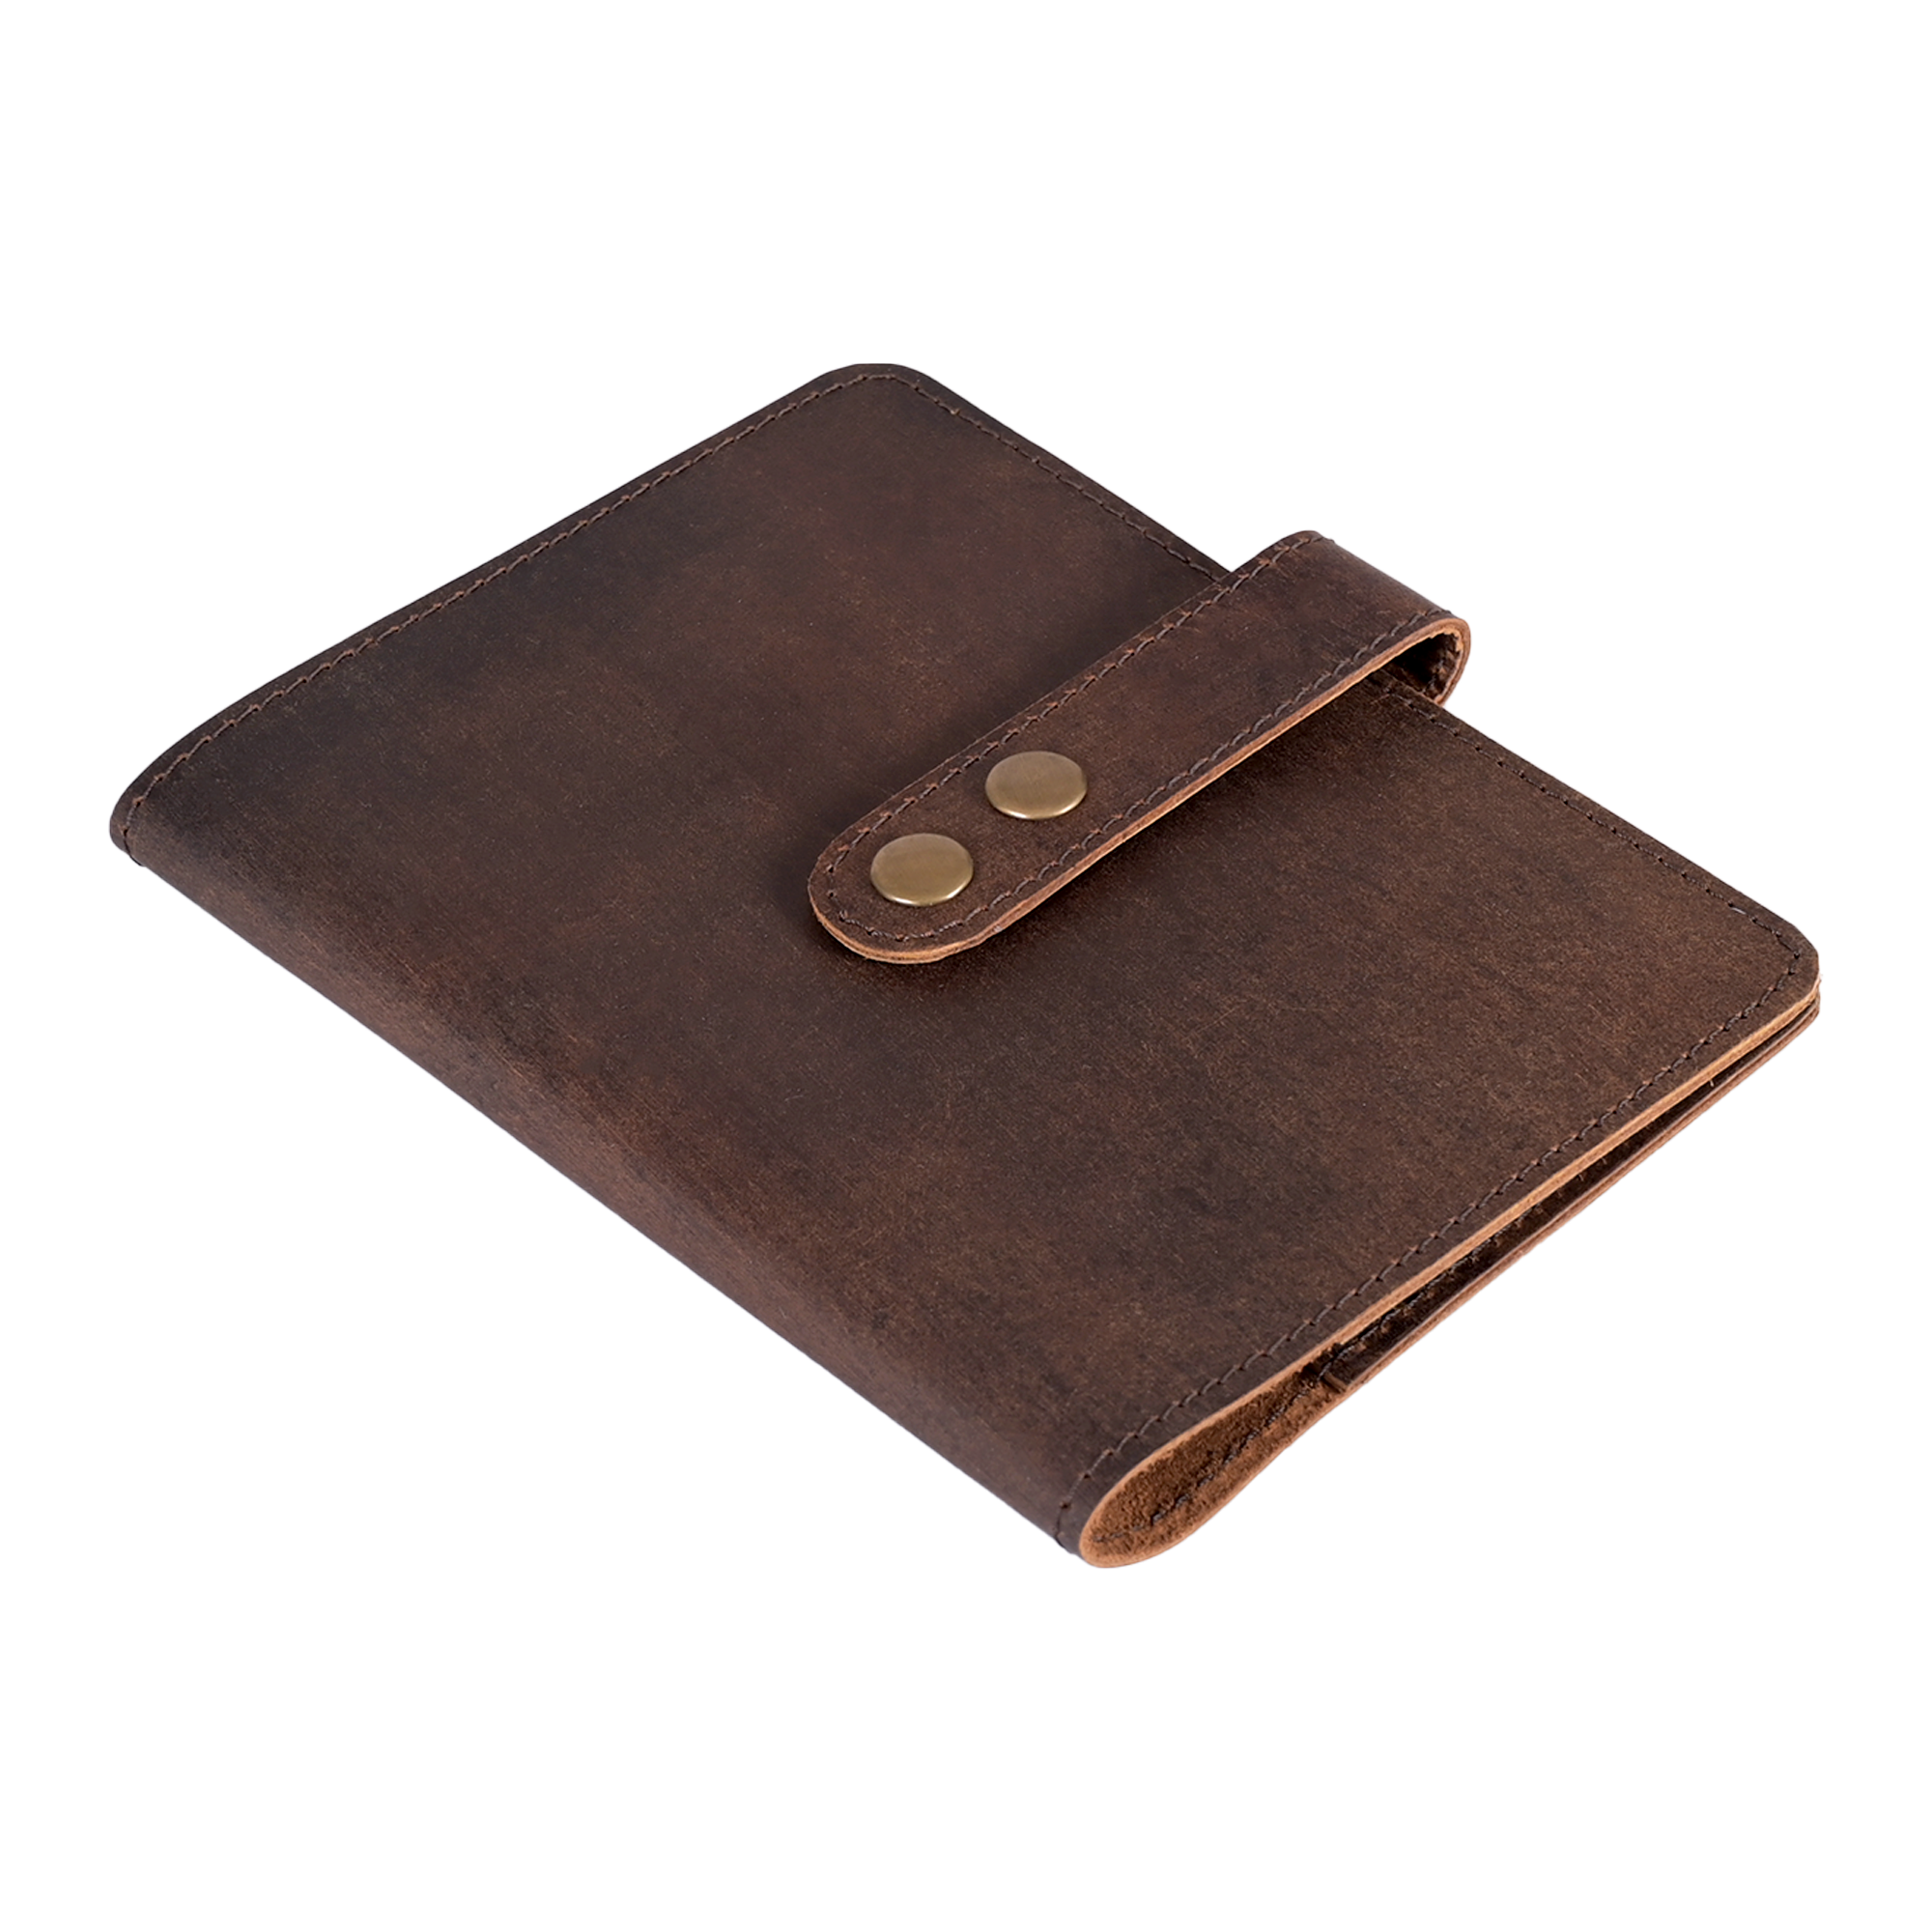 Standard Compact Leather Bible Cover